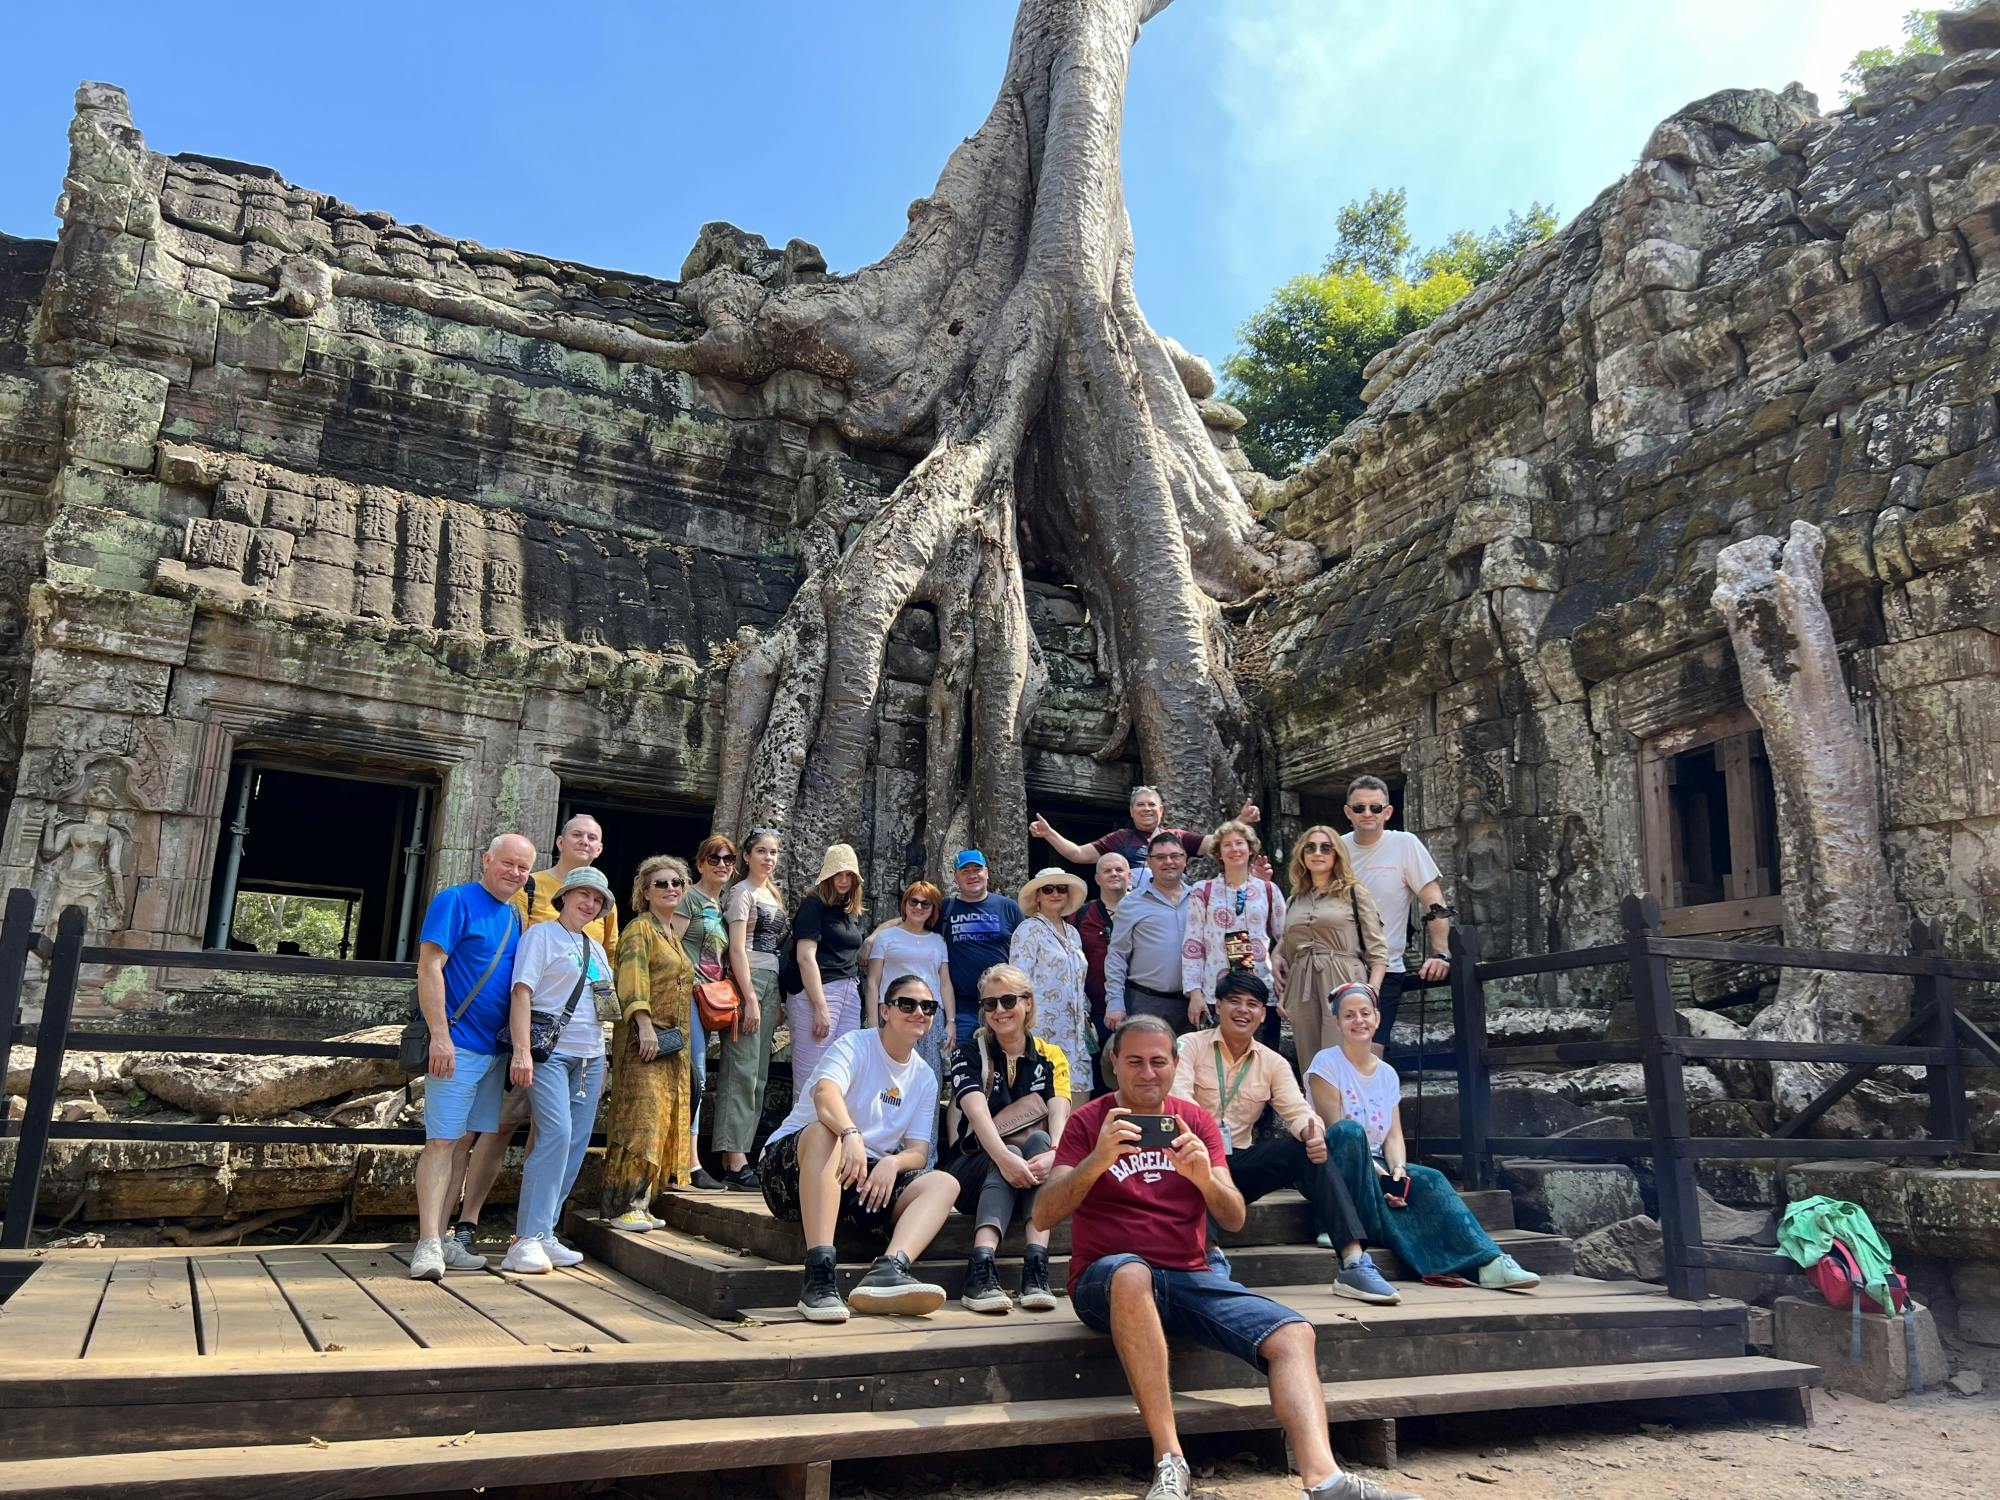 Full-Day Angkor Wat and Sunset Guided Tour from Siem Reap